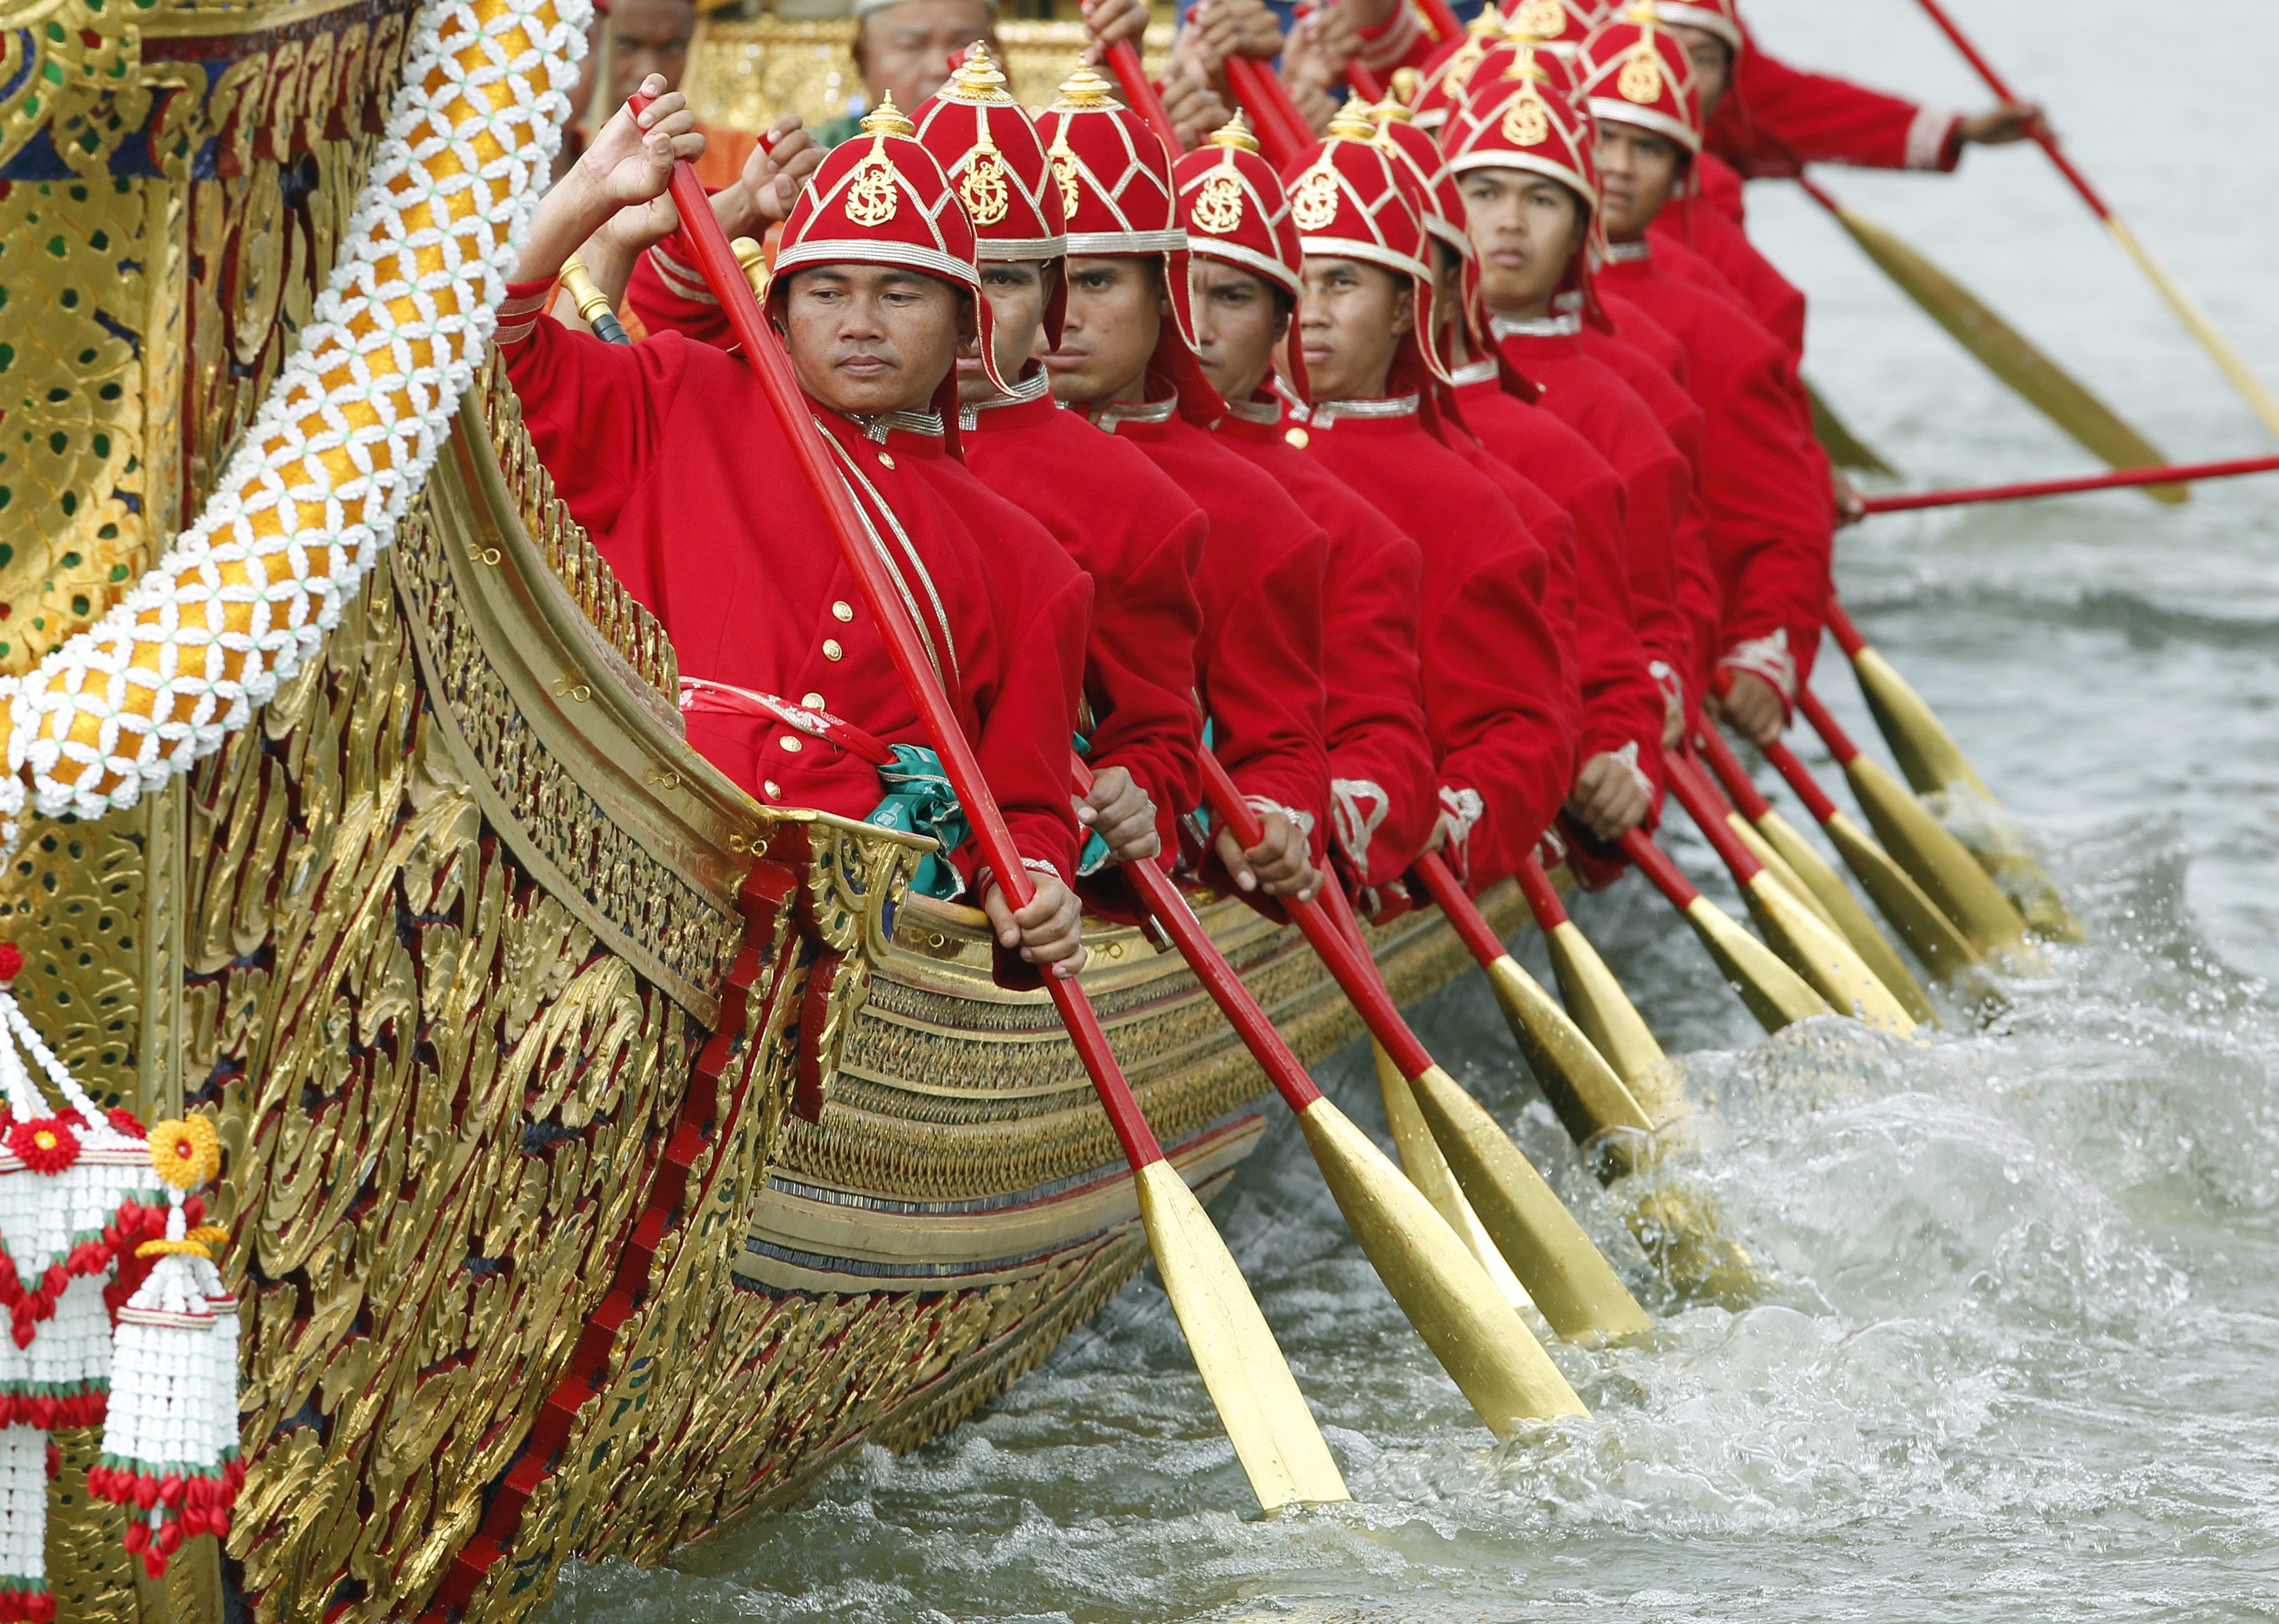 Thai Royal Navy oarsmen in ancient warrior costumes row in the royal barge procession on the Chao Phraya River in Bangkok on Friday. Photo: EPA